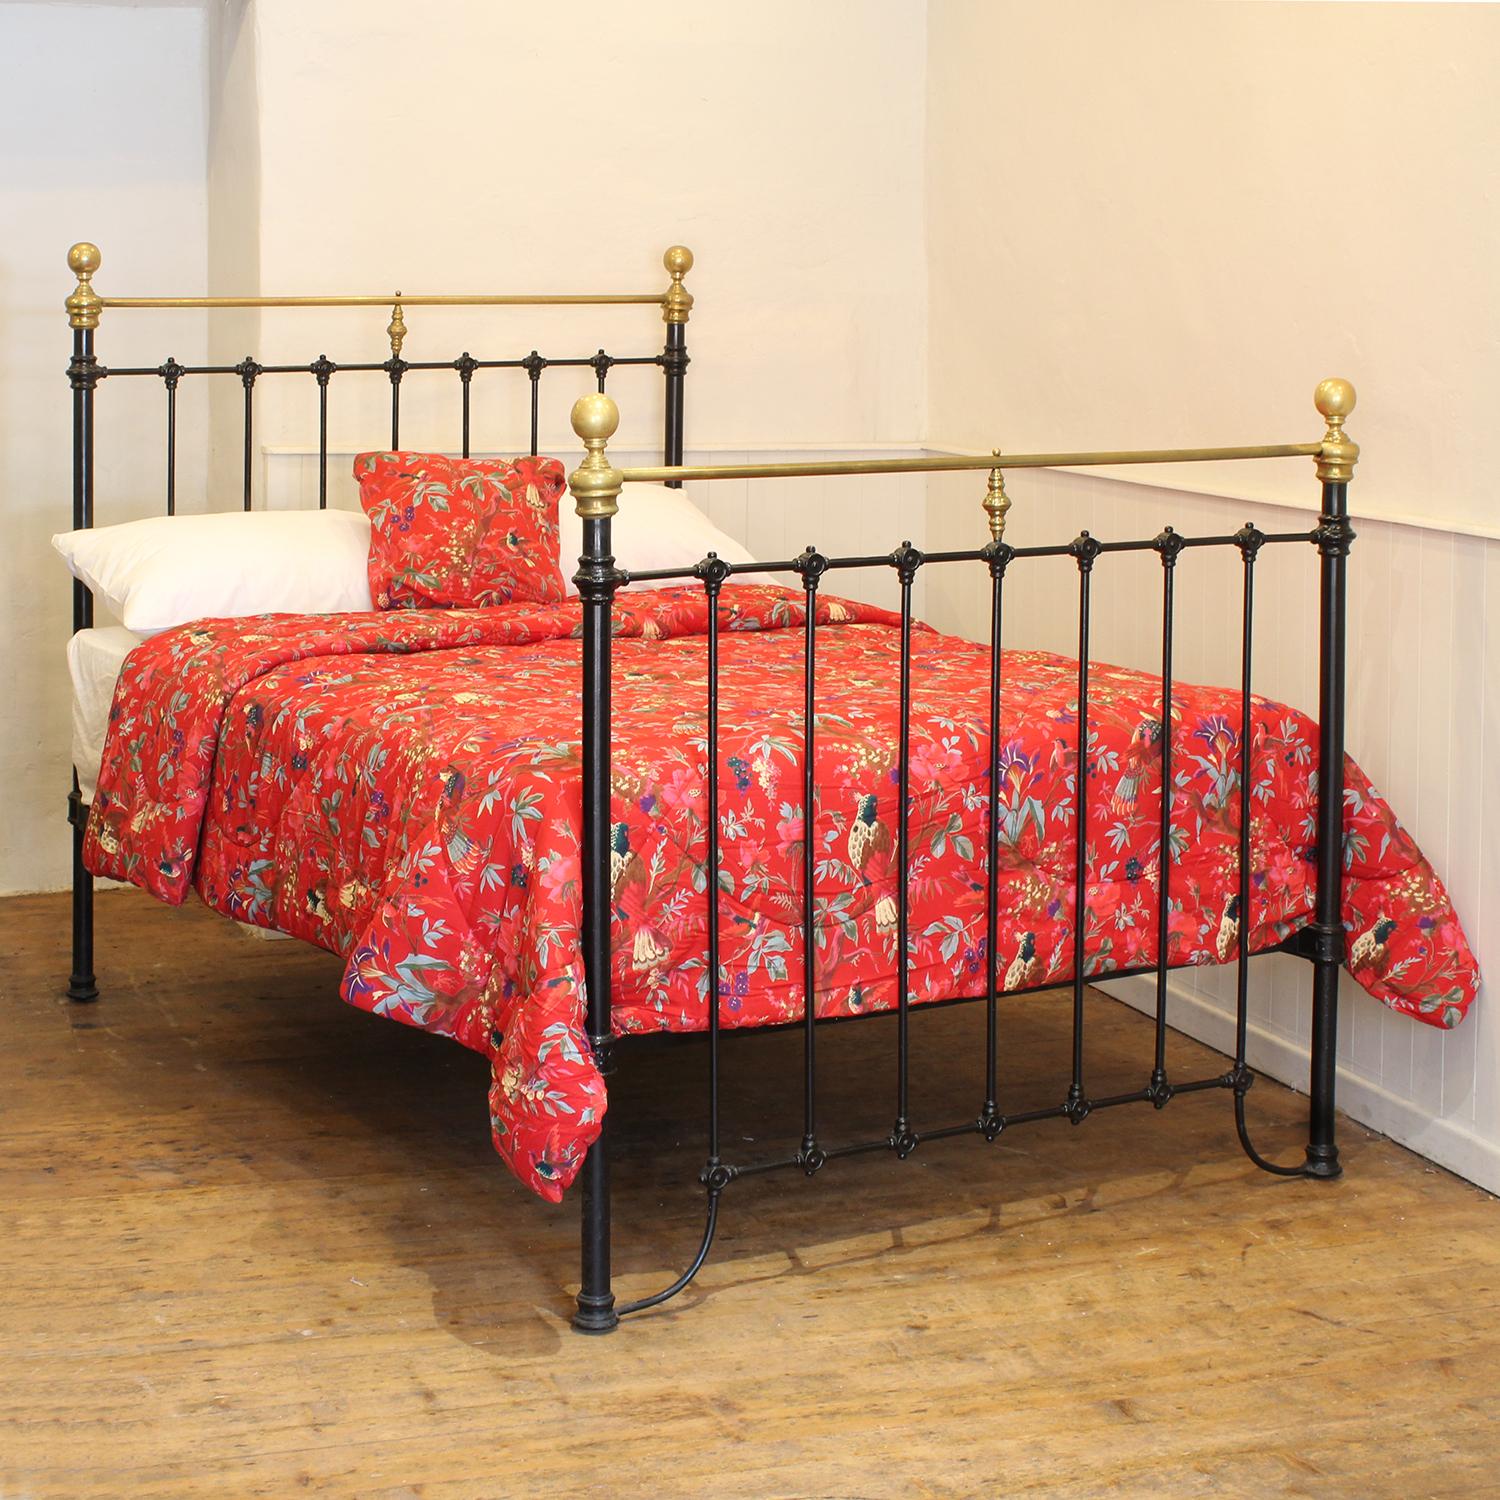 A Victorian brass and cast iron bedstead finished in black with curved brass top rails.

This bed accepts a double size 4ft 6in wide (54 inch or 135cm) base and mattress. 

The price includes a firm standard bed base to support the